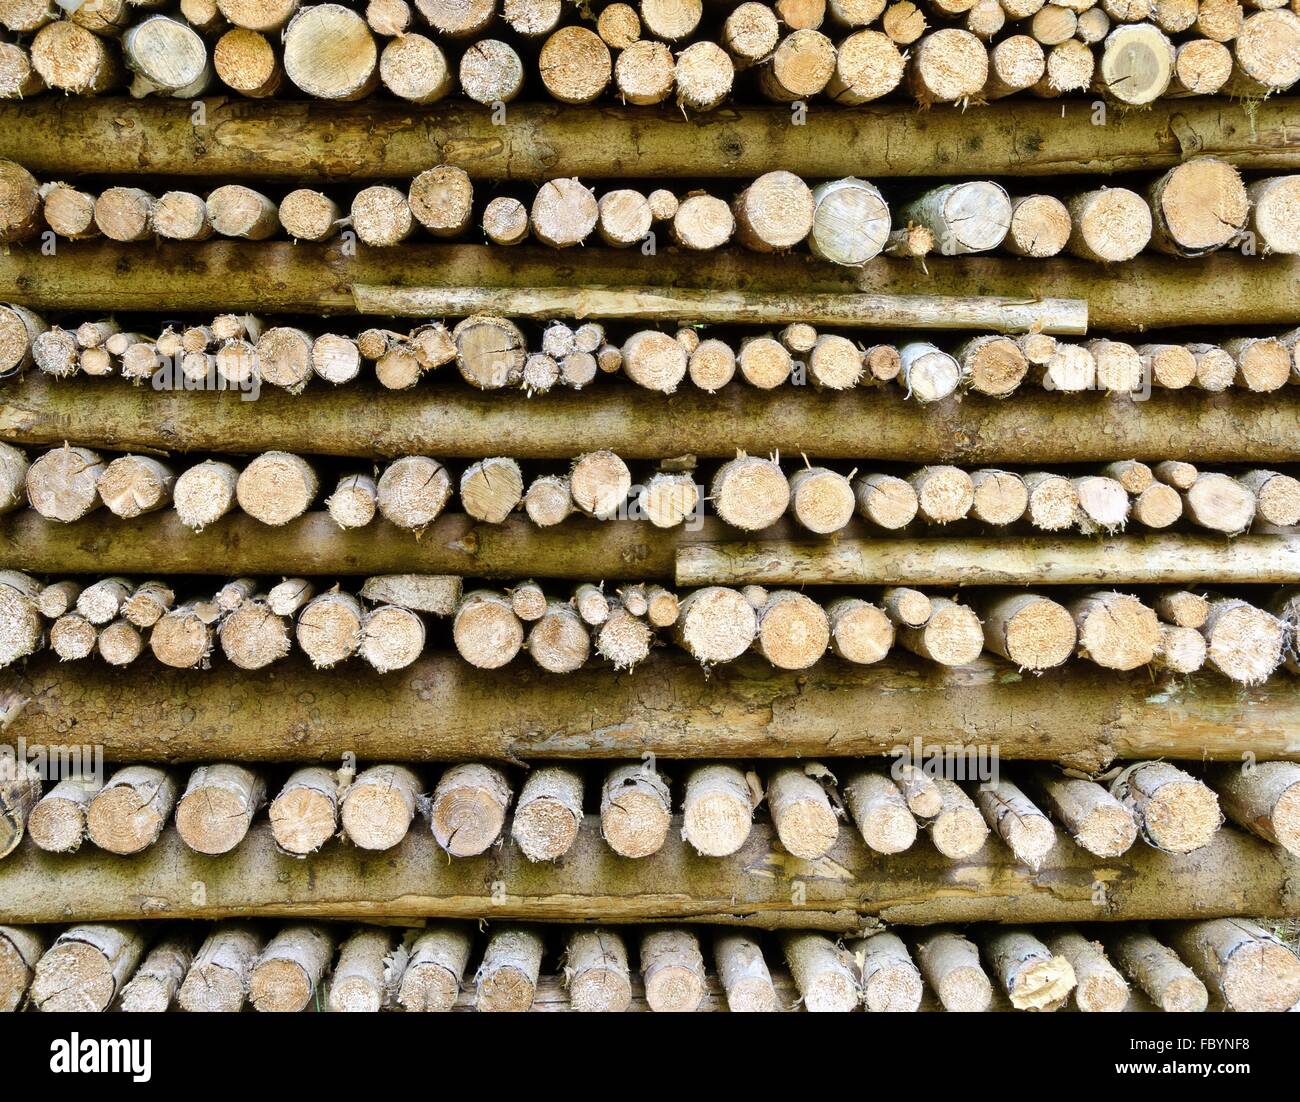 firs logs piled up Stock Photo